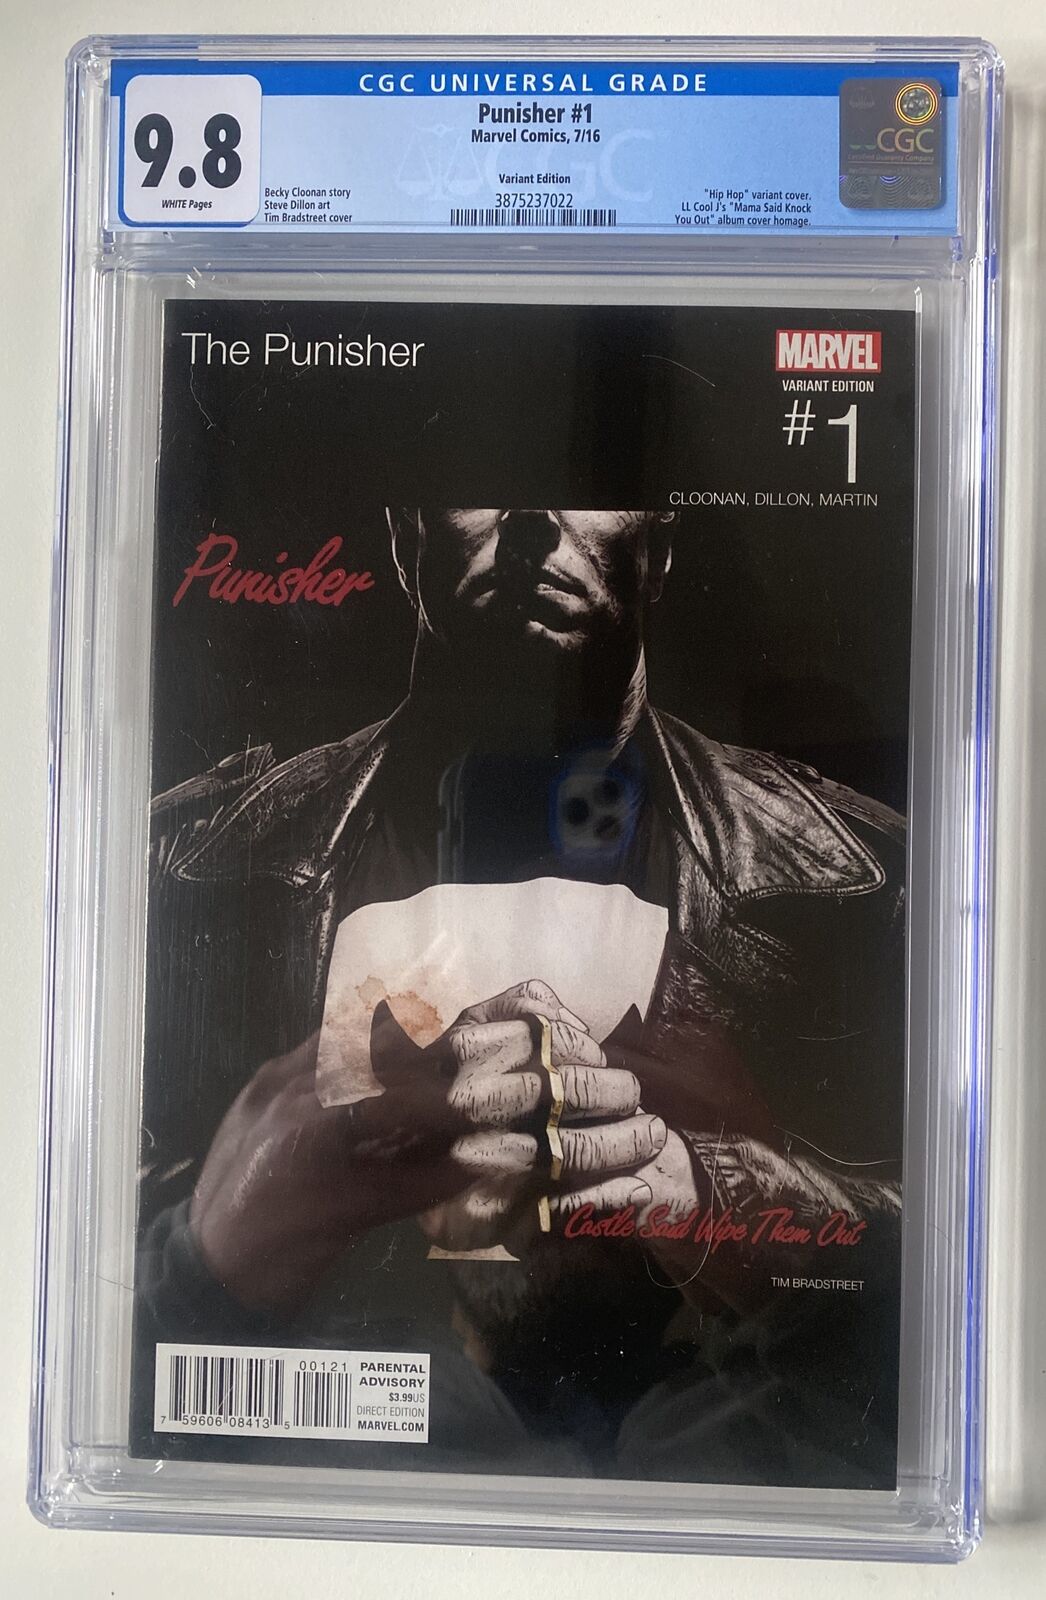 Punisher #1 CGC 9.8 Hip Hop Variant LL Cool J Homage Cover By Bradstreet *RARE*